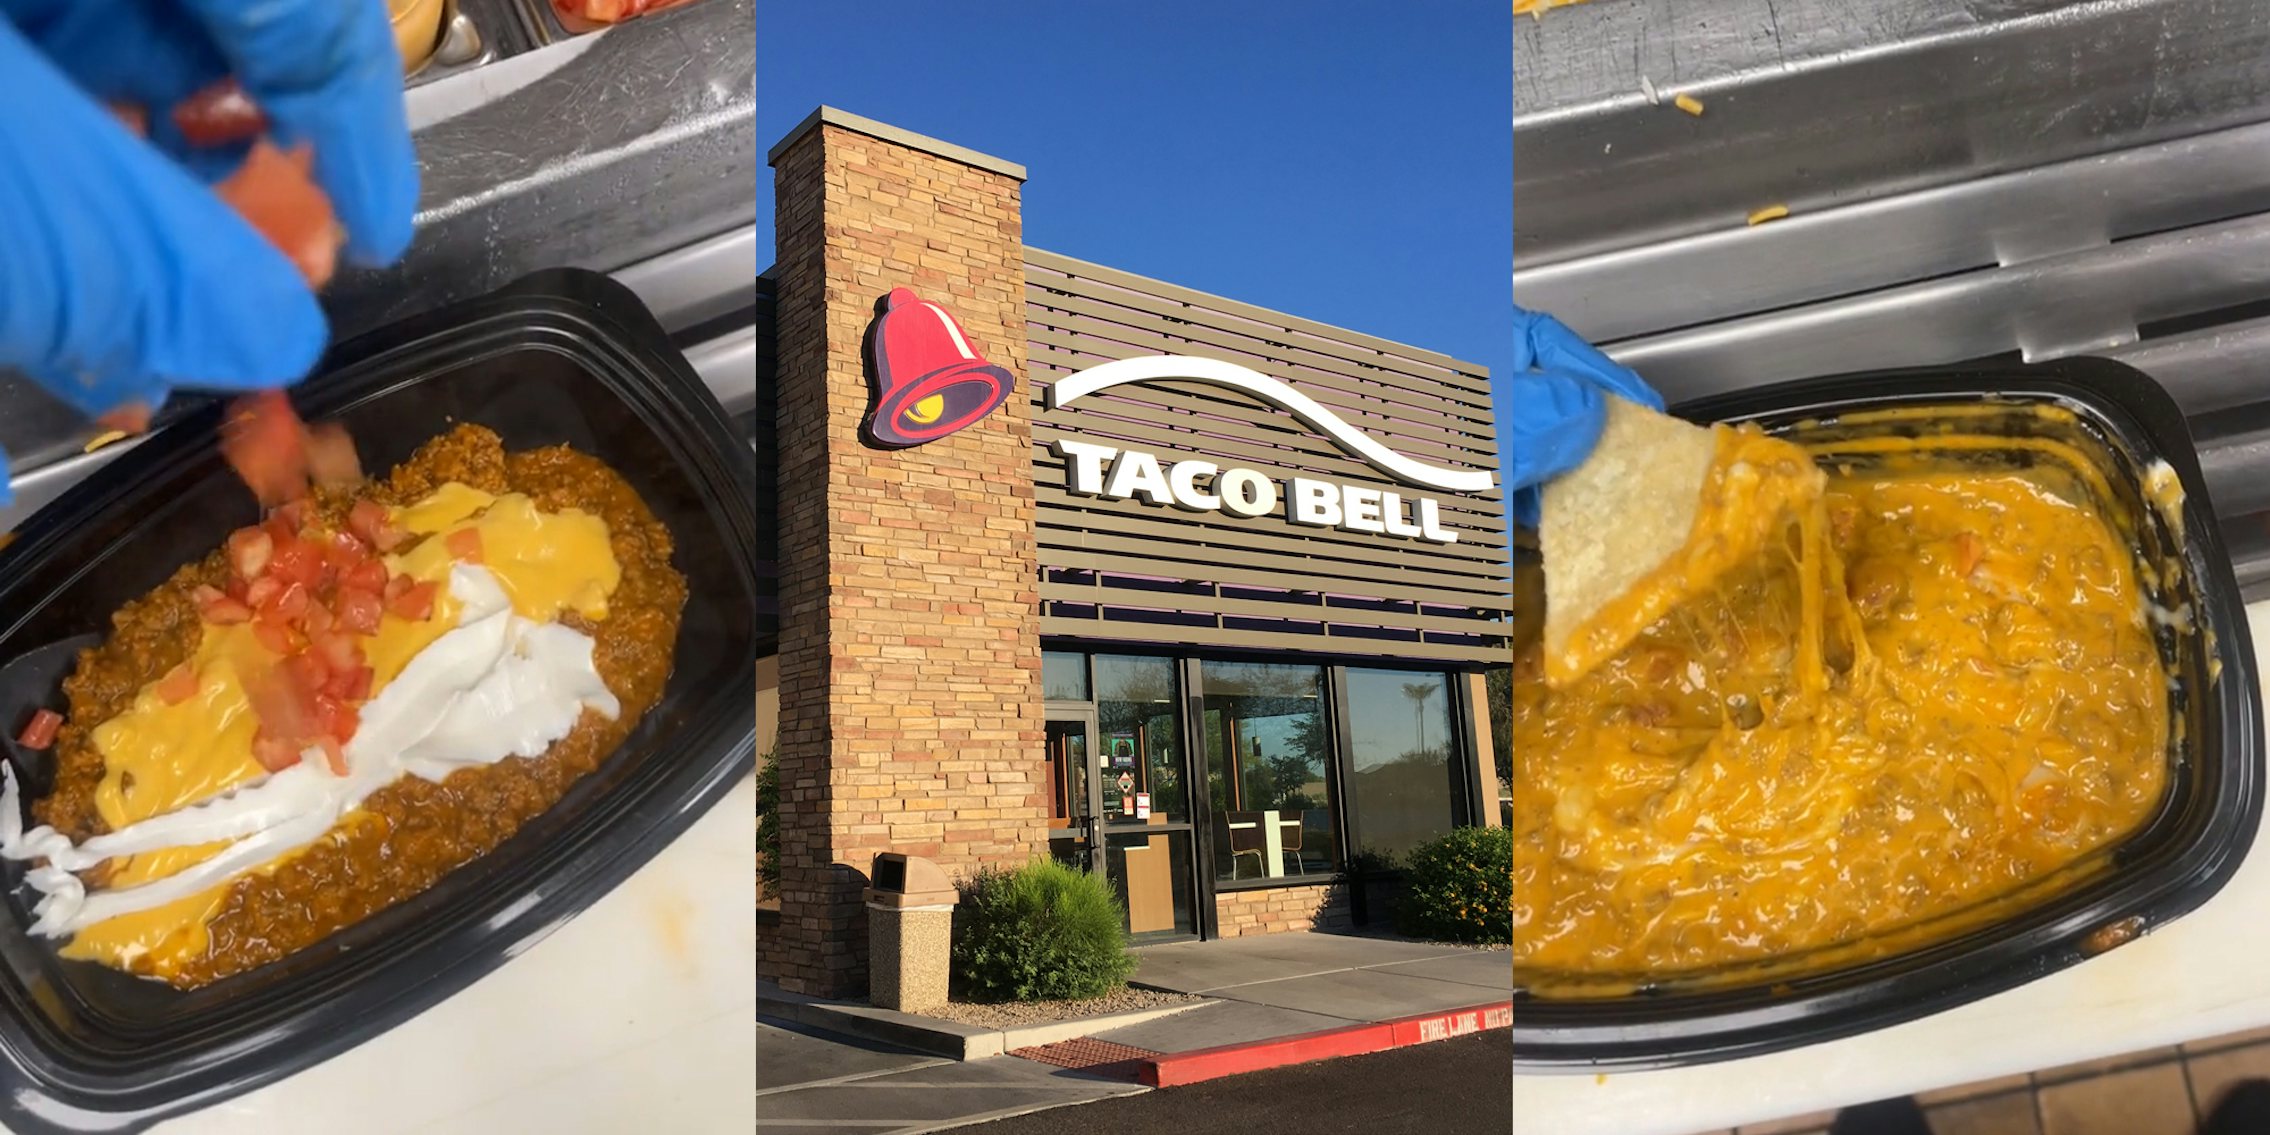 Taco Bell worker adding diced tomatoes to bowl (l) Taco Bell building with sign (c) Taco Bell worker dipping chip in cheesy bowl (r)